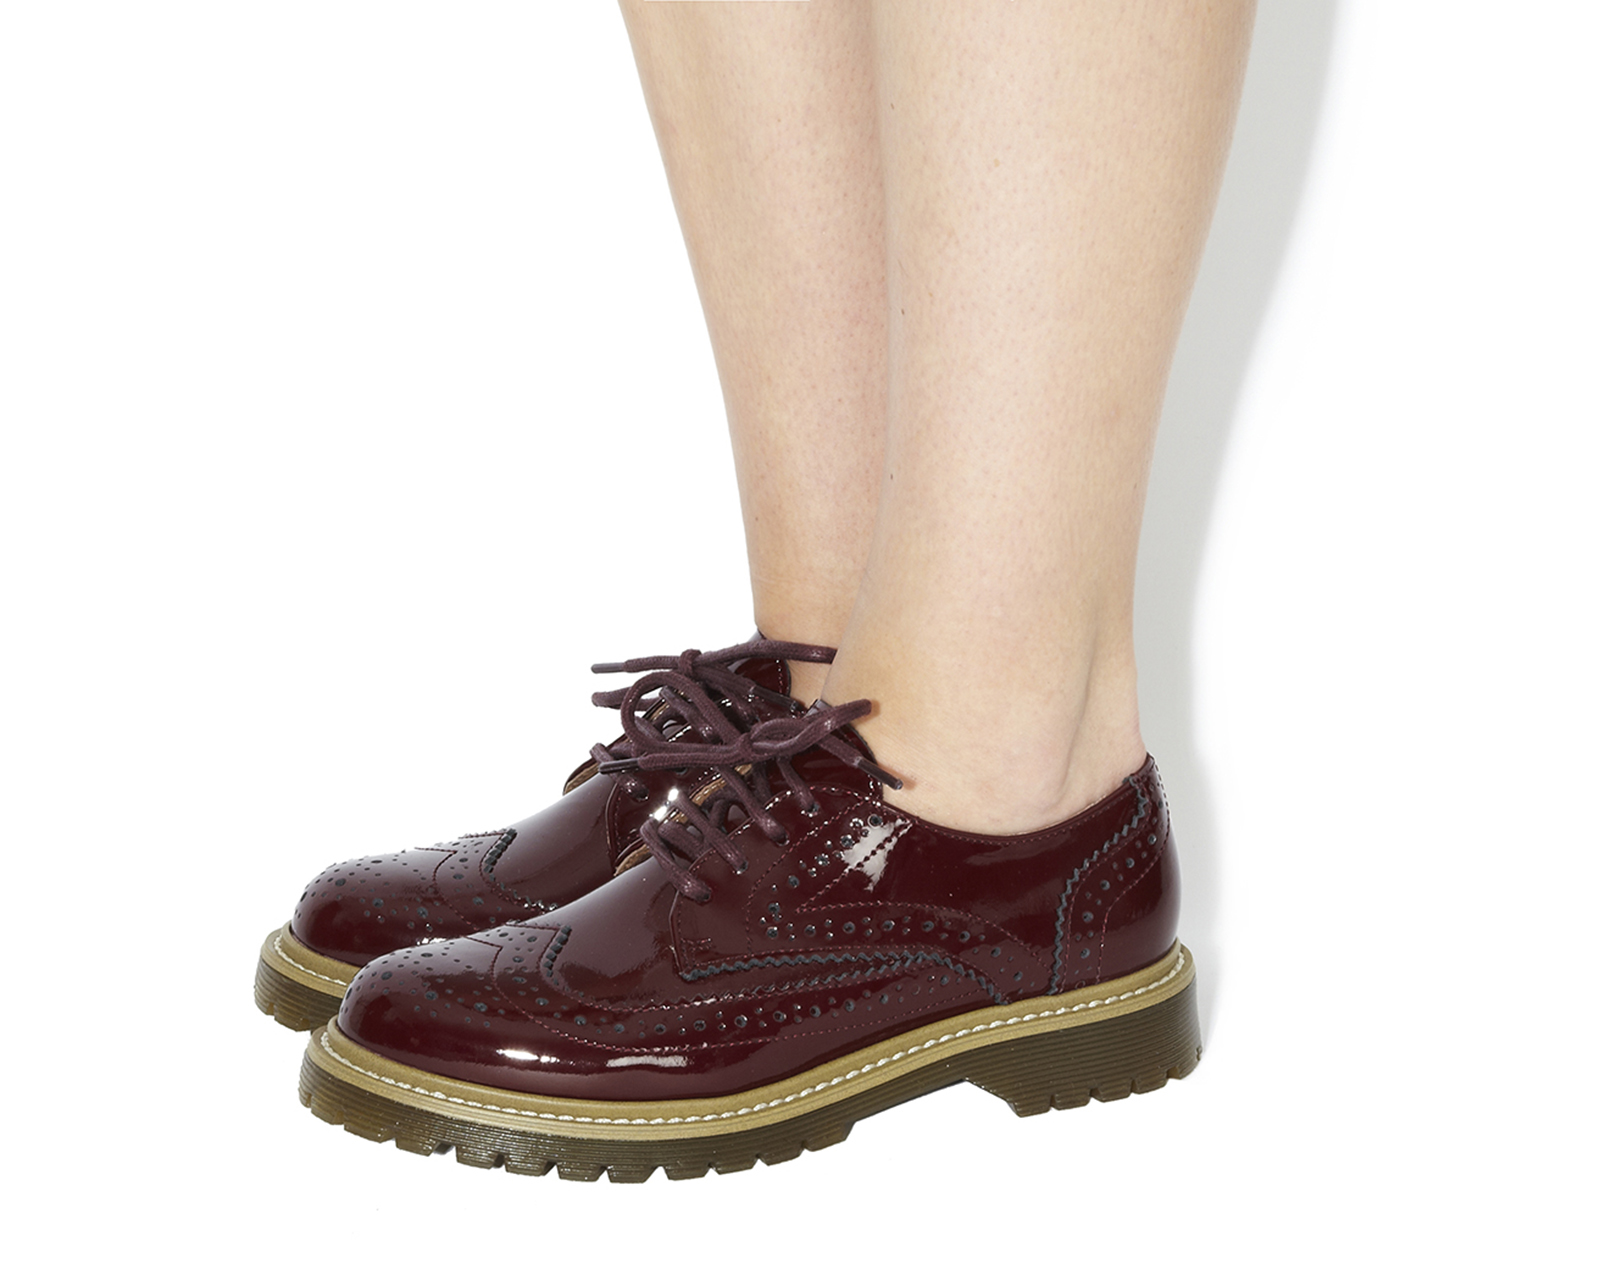 OFFICERush Hour Lace Up BrogueBurgundy Patent Leather